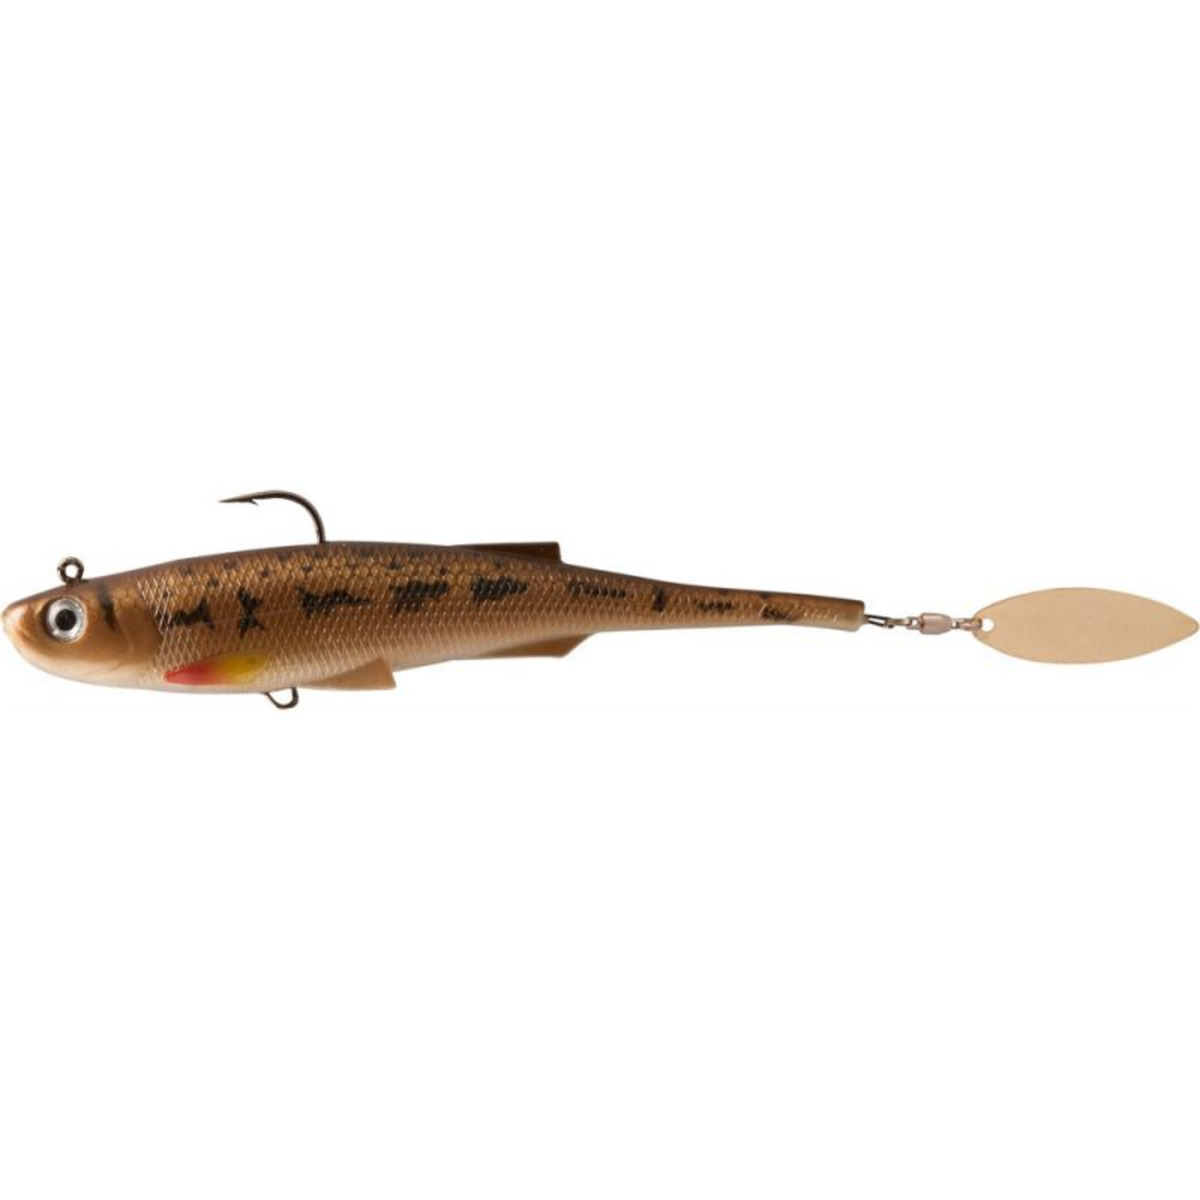 Rapture Mad Spintail Shad - 20.0 g - 100 mm - GD